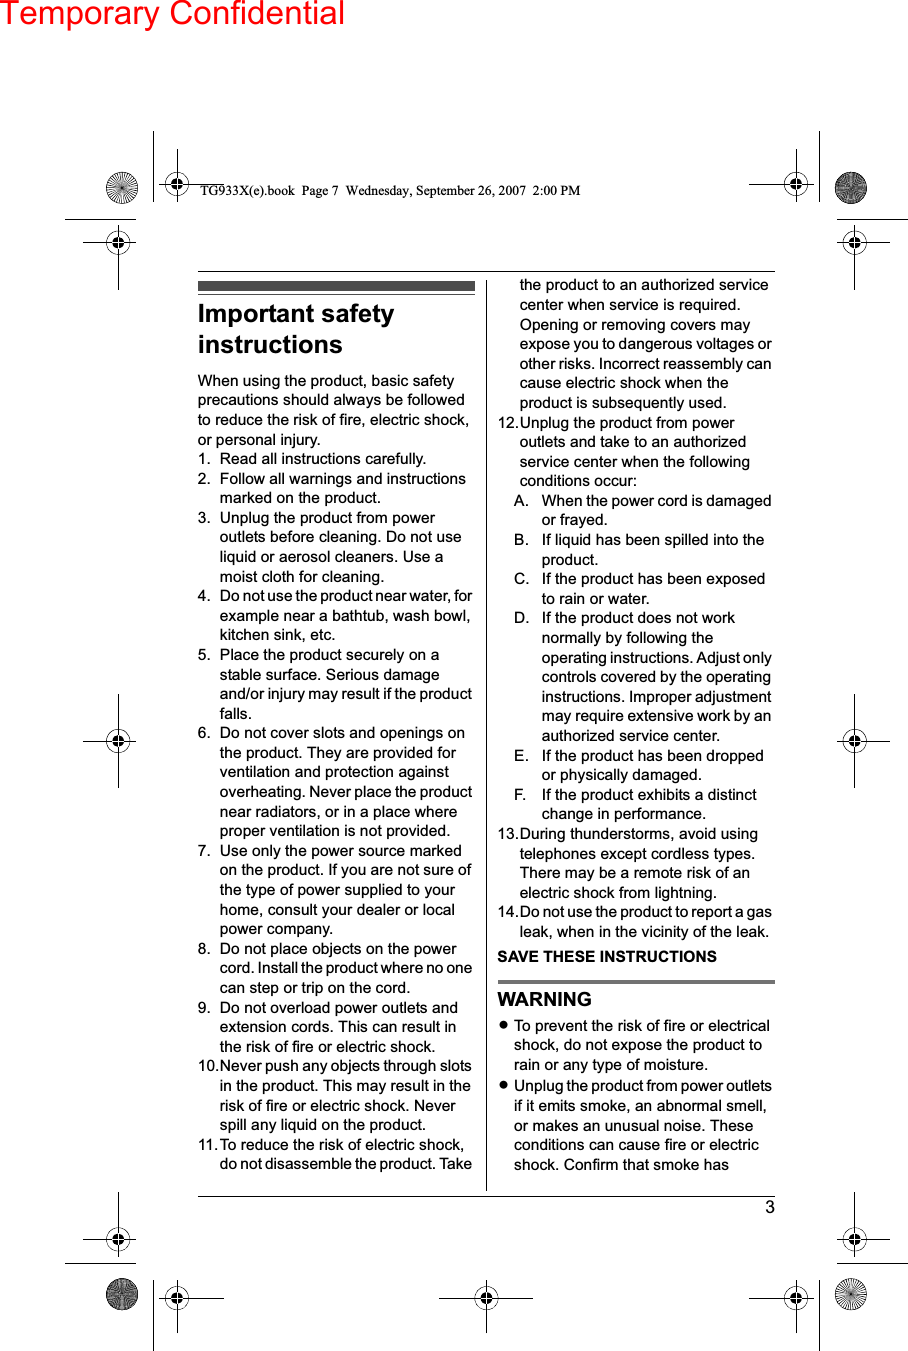 Temporary Confidential3Important safetyinstructionsWhen using the product, basic safetyprecautions should always be followedto reduce the risk of fire, electric shock,or personal injury.1. Read all instructions carefully.2. Follow all warnings and instructionsmarked on the product.3. Unplug the product from poweroutlets before cleaning. Do not useliquid or aerosol cleaners. Use amoist cloth for cleaning.4. Do not use the product near water, forexample near a bathtub, wash bowl,kitchen sink, etc.5. Place the product securely on astable surface. Serious damageand/or injury may result if the productfalls.6. Do not cover slots and openings onthe product. They are provided forventilation and protection againstoverheating. Never place the productnear radiators, or in a place whereproper ventilation is not provided.7. Use only the power source markedon the product. If you are not sure ofthe type of power supplied to yourhome, consult your dealer or localpower company.8. Do not place objects on the powercord. Install the product where no onecan step or trip on the cord.9. Do not overload power outlets andextension cords. This can result inthe risk of fire or electric shock.10.Never push any objects through slotsin the product. This may result in therisk of fire or electric shock. Neverspill any liquid on the product.11.To reduce the risk of electric shock,do not disassemble the product. Takethe product to an authorized servicecenter when service is required.Opening or removing covers mayexpose you to dangerous voltages orother risks. Incorrect reassembly cancause electric shock when theproduct is subsequently used.12.Unplug the product from poweroutlets and take to an authorizedservice center when the followingconditions occur:A. When the power cord is damagedor frayed.B. If liquid has been spilled into theproduct.C. If the product has been exposedto rain or water.D. If the product does not worknormally by following theoperating instructions. Adjust onlycontrols covered by the operatinginstructions. Improper adjustmentmay require extensive work by anauthorized service center.E. If the product has been droppedor physically damaged.F. If the product exhibits a distinctchange in performance.13.During thunderstorms, avoid usingtelephones except cordless types.There may be a remote risk of anelectric shock from lightning.14.Do not use the product to report a gasleak, when in the vicinity of the leak.SAVE THESE INSTRUCTIONSWARNINGLTo prevent the risk of fire or electricalshock, do not expose the product torain or any type of moisture.LUnplug the product from power outletsif it emits smoke, an abnormal smell,or makes an unusual noise. Theseconditions can cause fire or electricshock. Confirm that smoke hasTG933X(e).book Page 7 Wednesday, September 26, 2007 2:00 PM